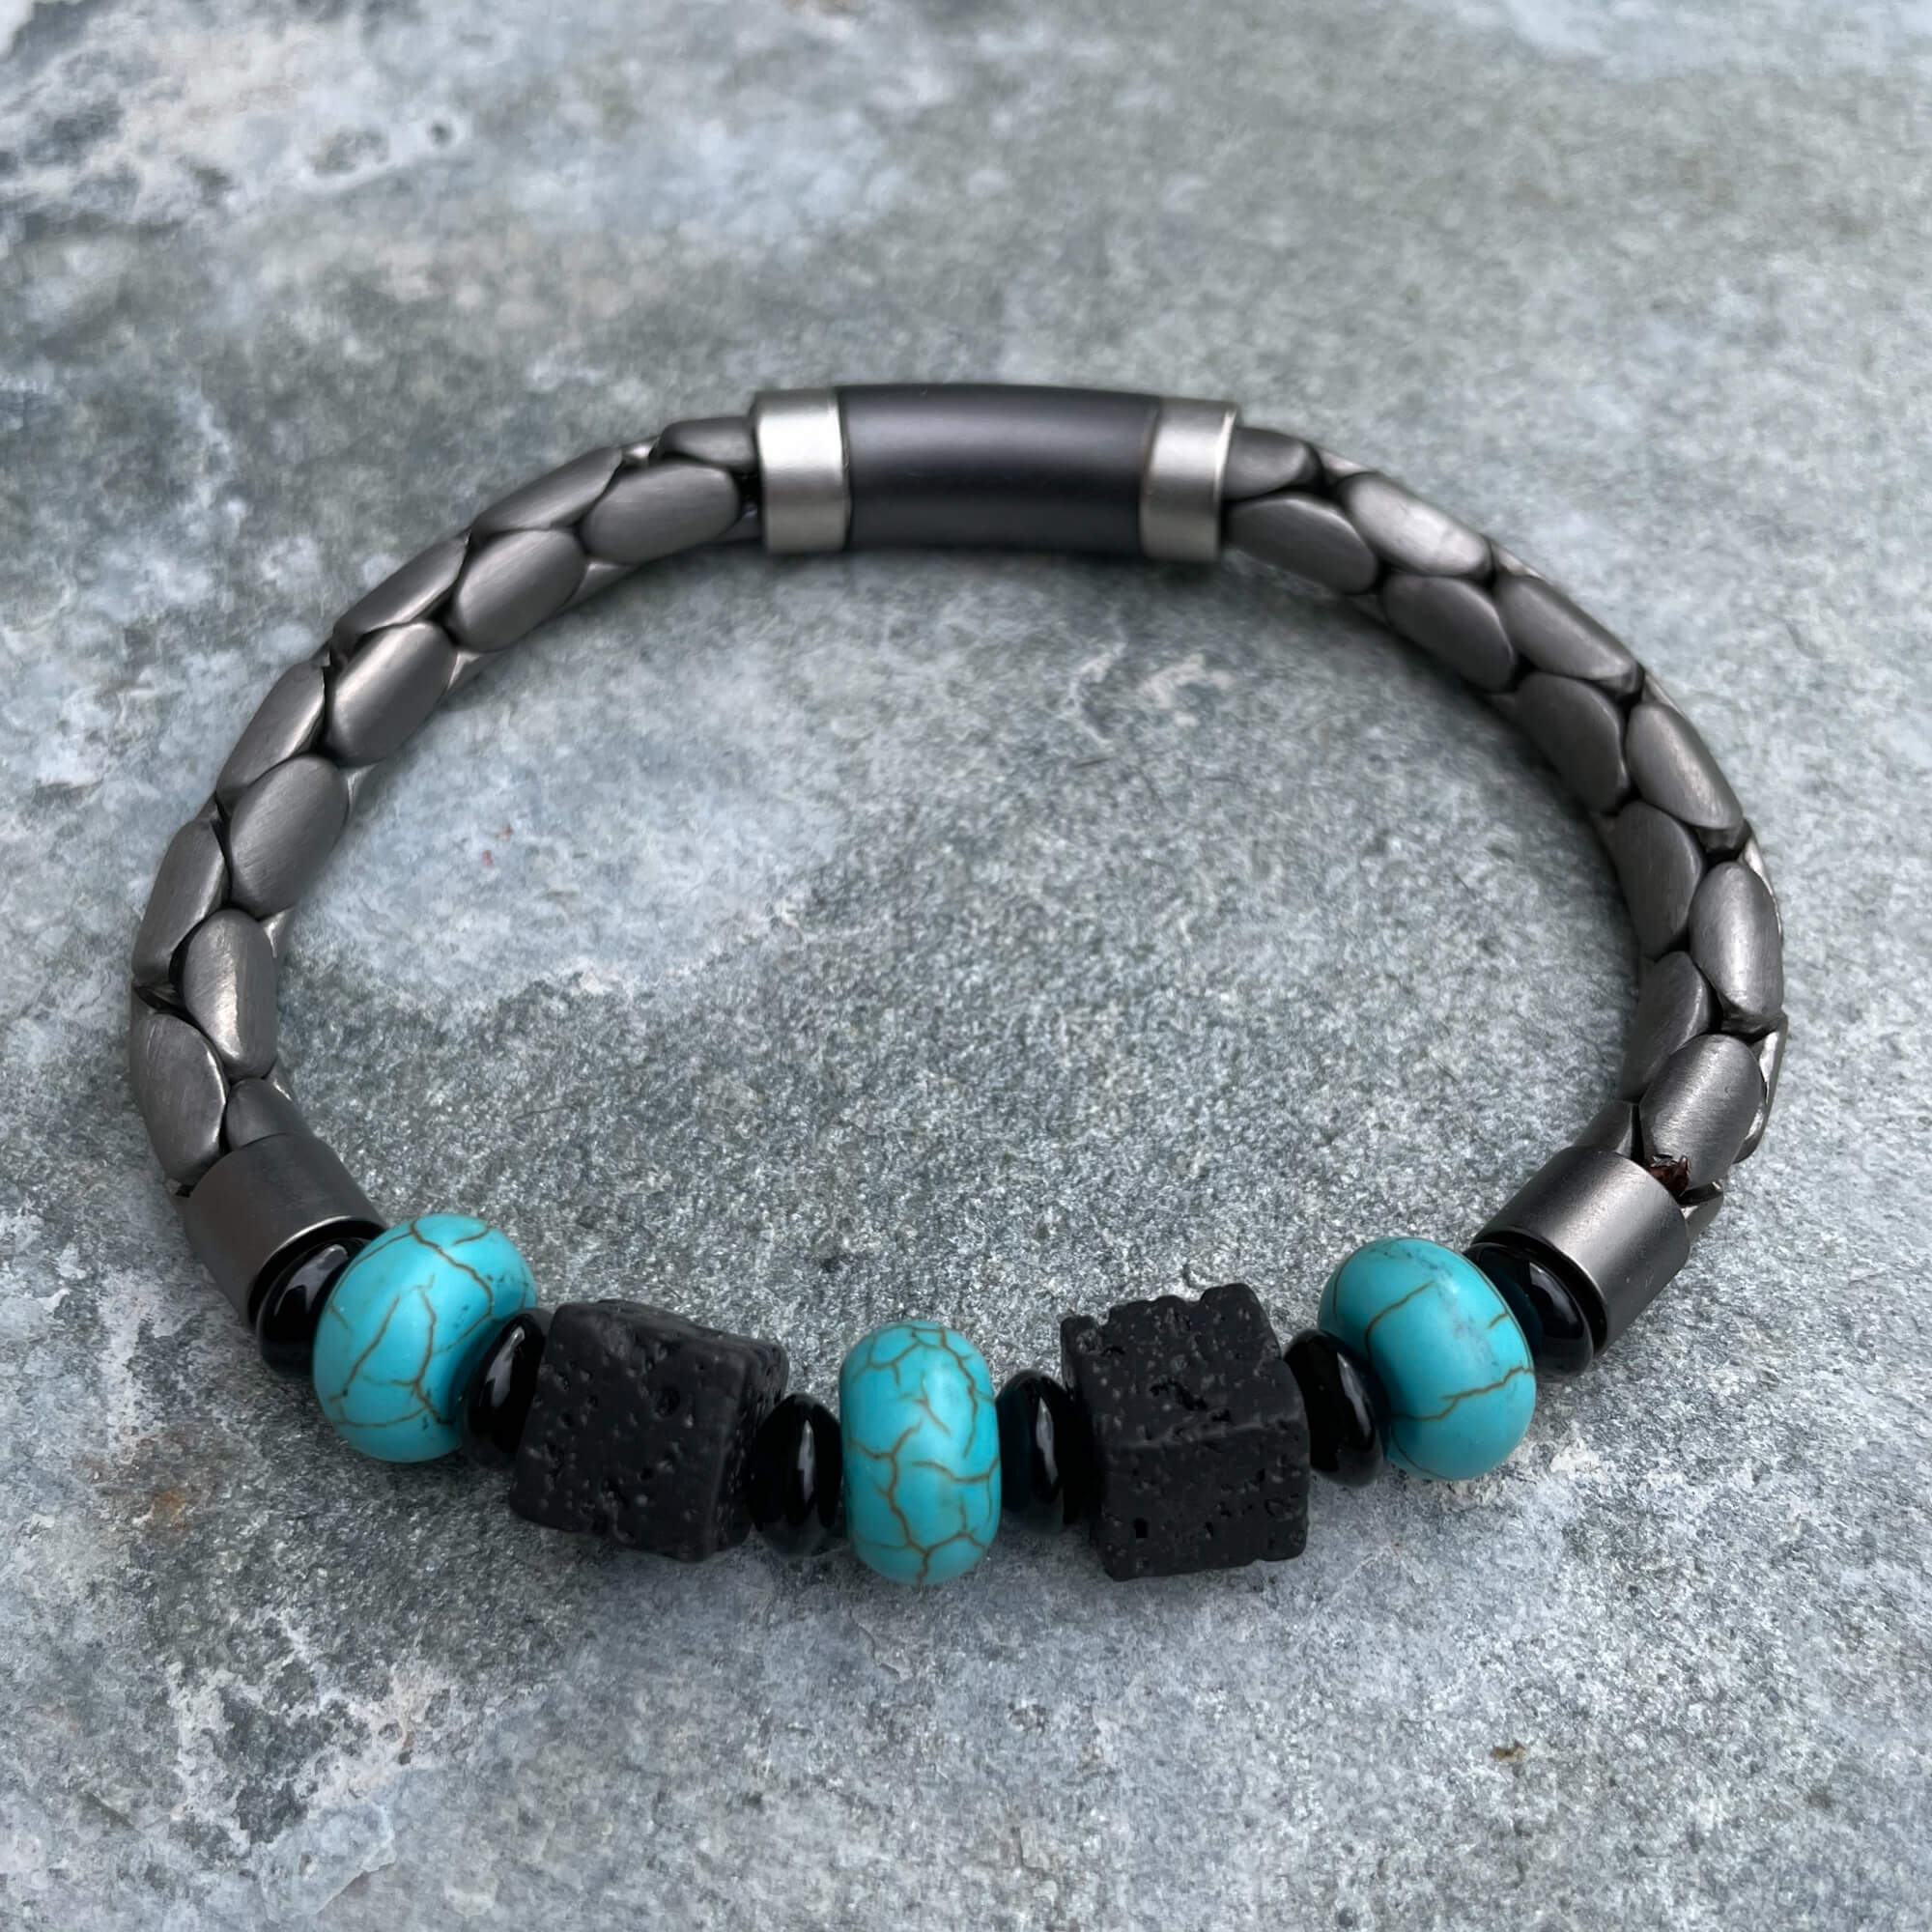 Gray bracelet with turcuoise and black stones